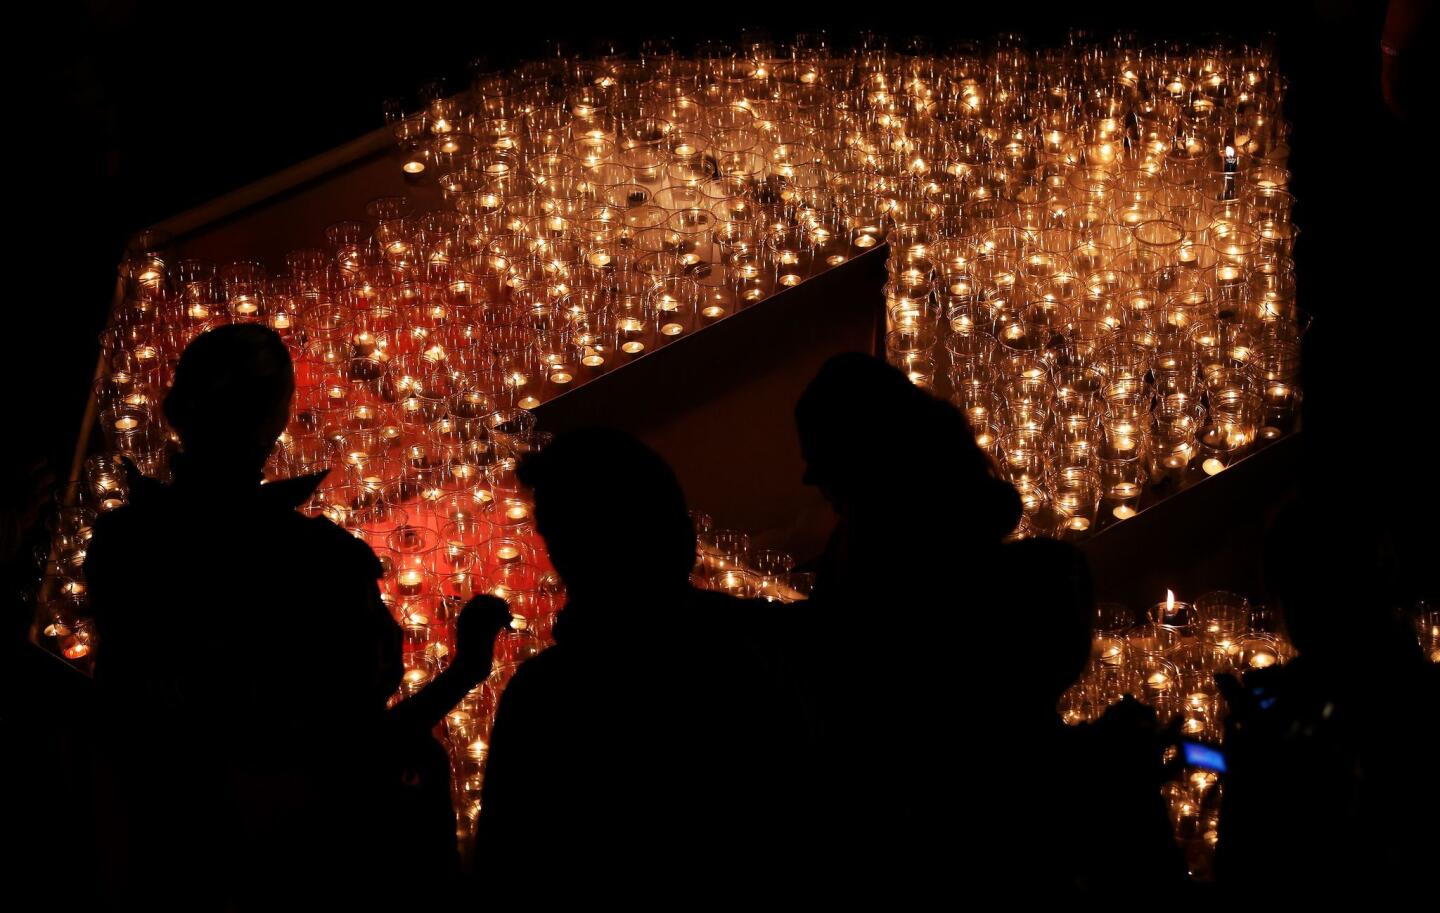 Germany began the 25th anniversary of the Berlin Wall's demise in Leipzig, where an Oct. 9, 1989, protest led to the populist effort to pull the wall down. People lighted candles Thursday in Leipzig's Augustplatz square to celebrate the protests that led to freedom.